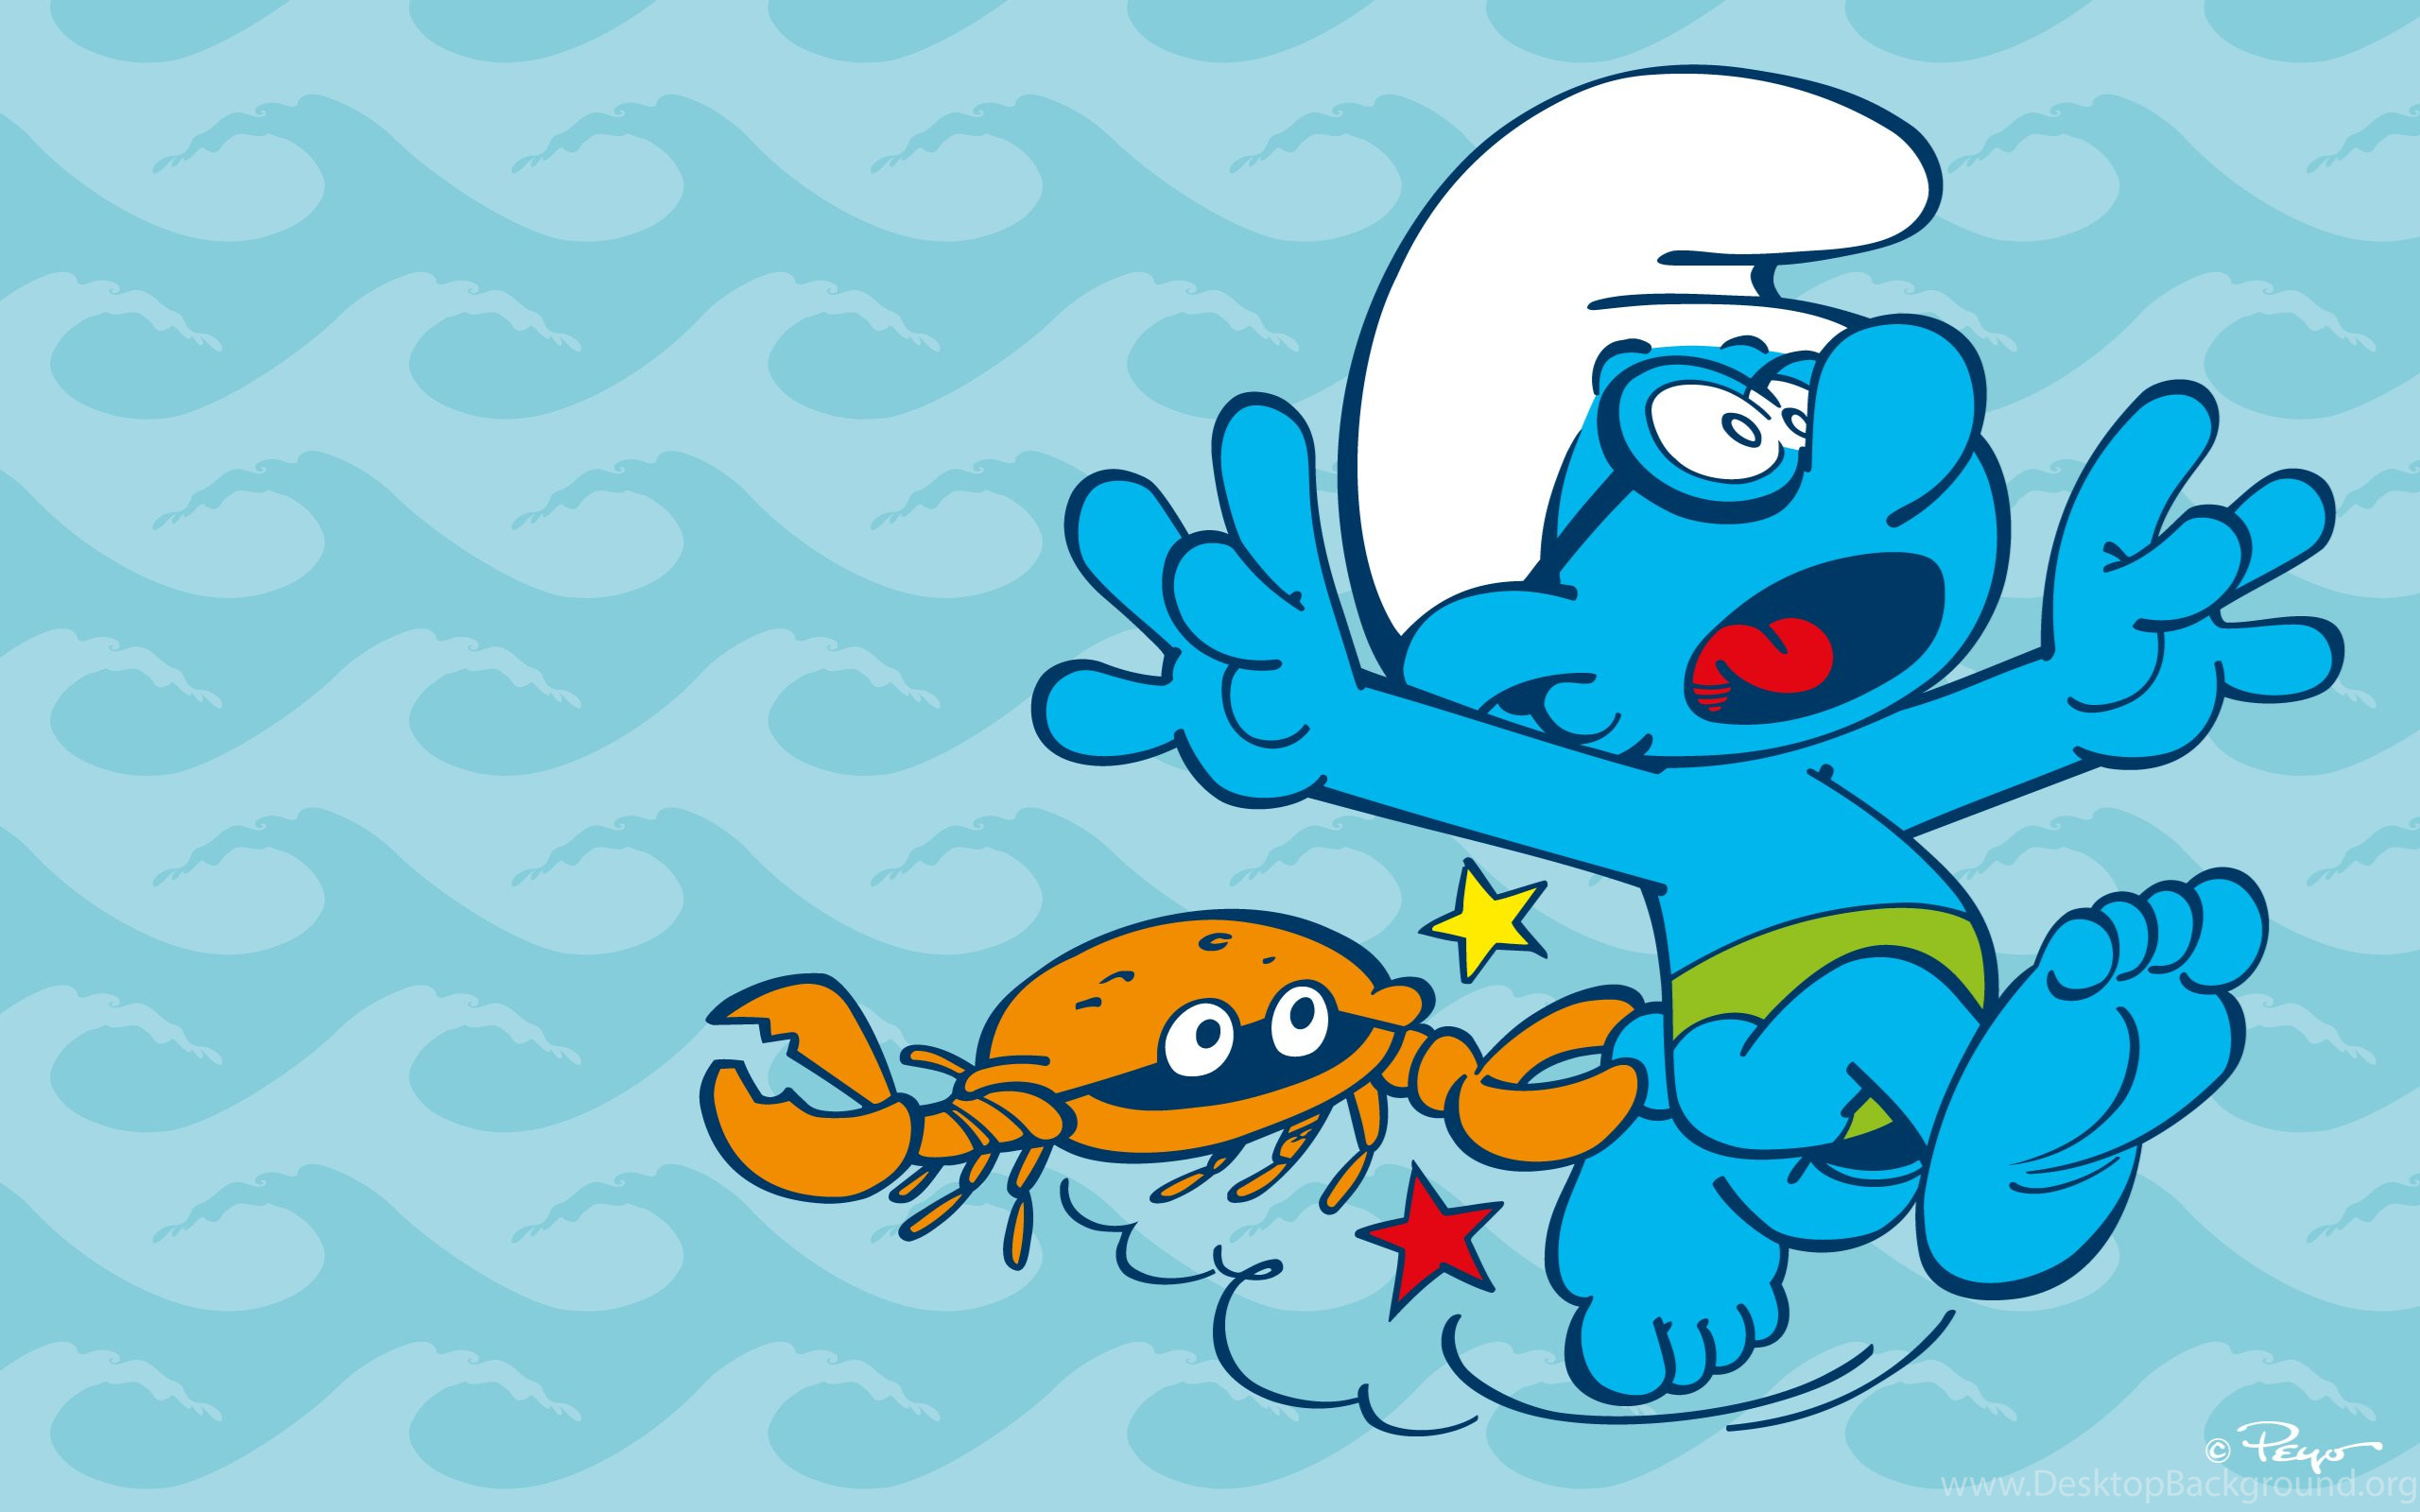 2560x1600 Smurfs:Wallpapers Papercutz the Kids Graphic Novel Publisher